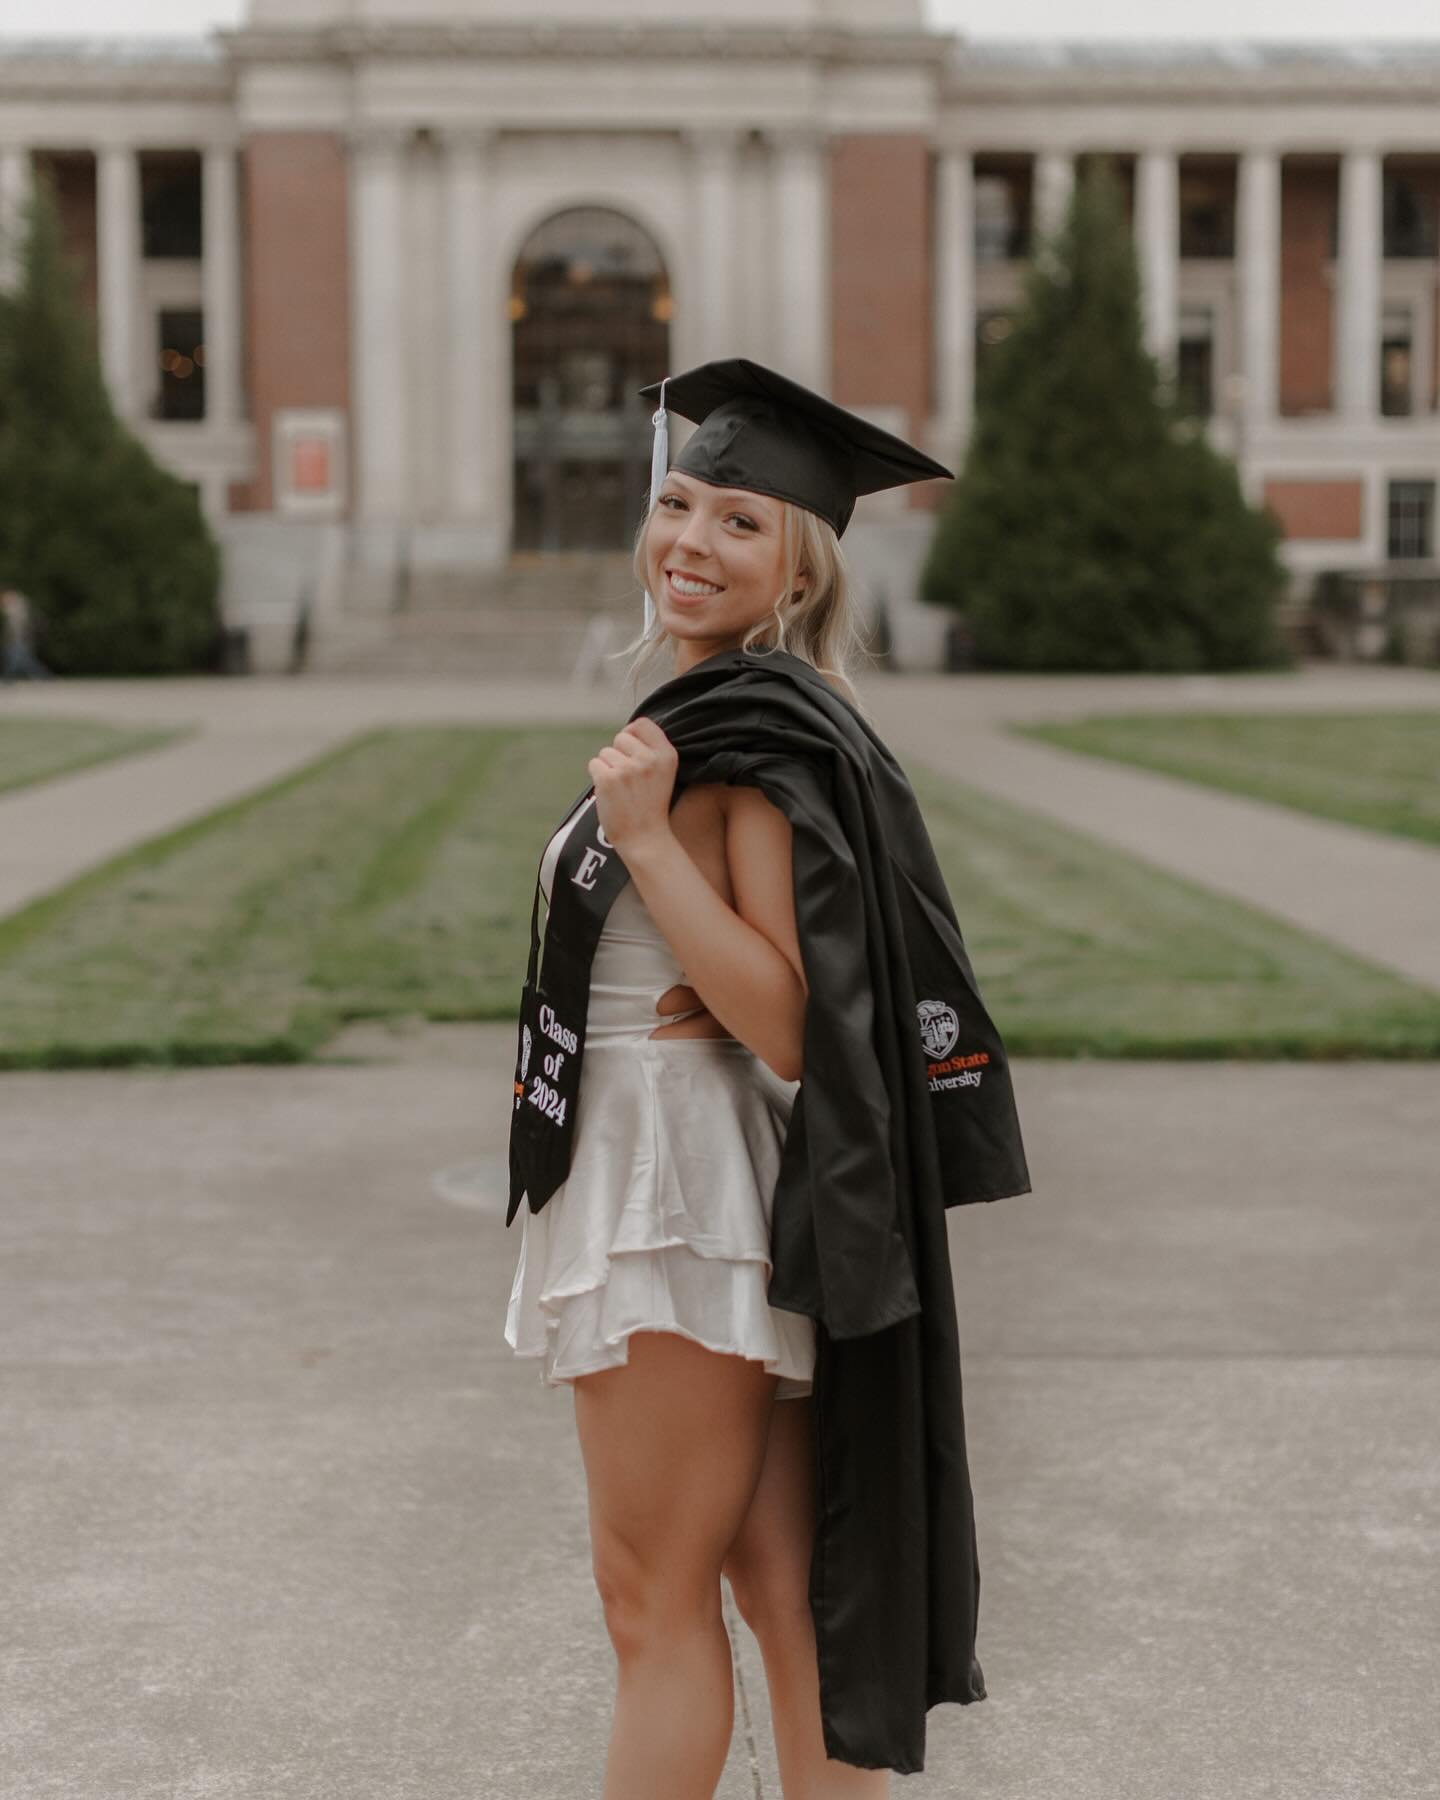 // I had a unique college experience..
if you&rsquo;ve known me long, i&rsquo;m sure you&rsquo;ve heard the story - but if you haven&rsquo;t, here it is.
⠀⠀⠀⠀⠀⠀⠀⠀⠀
I went straight to OSU from high school. I thought I knew exactly what I wanted to do 